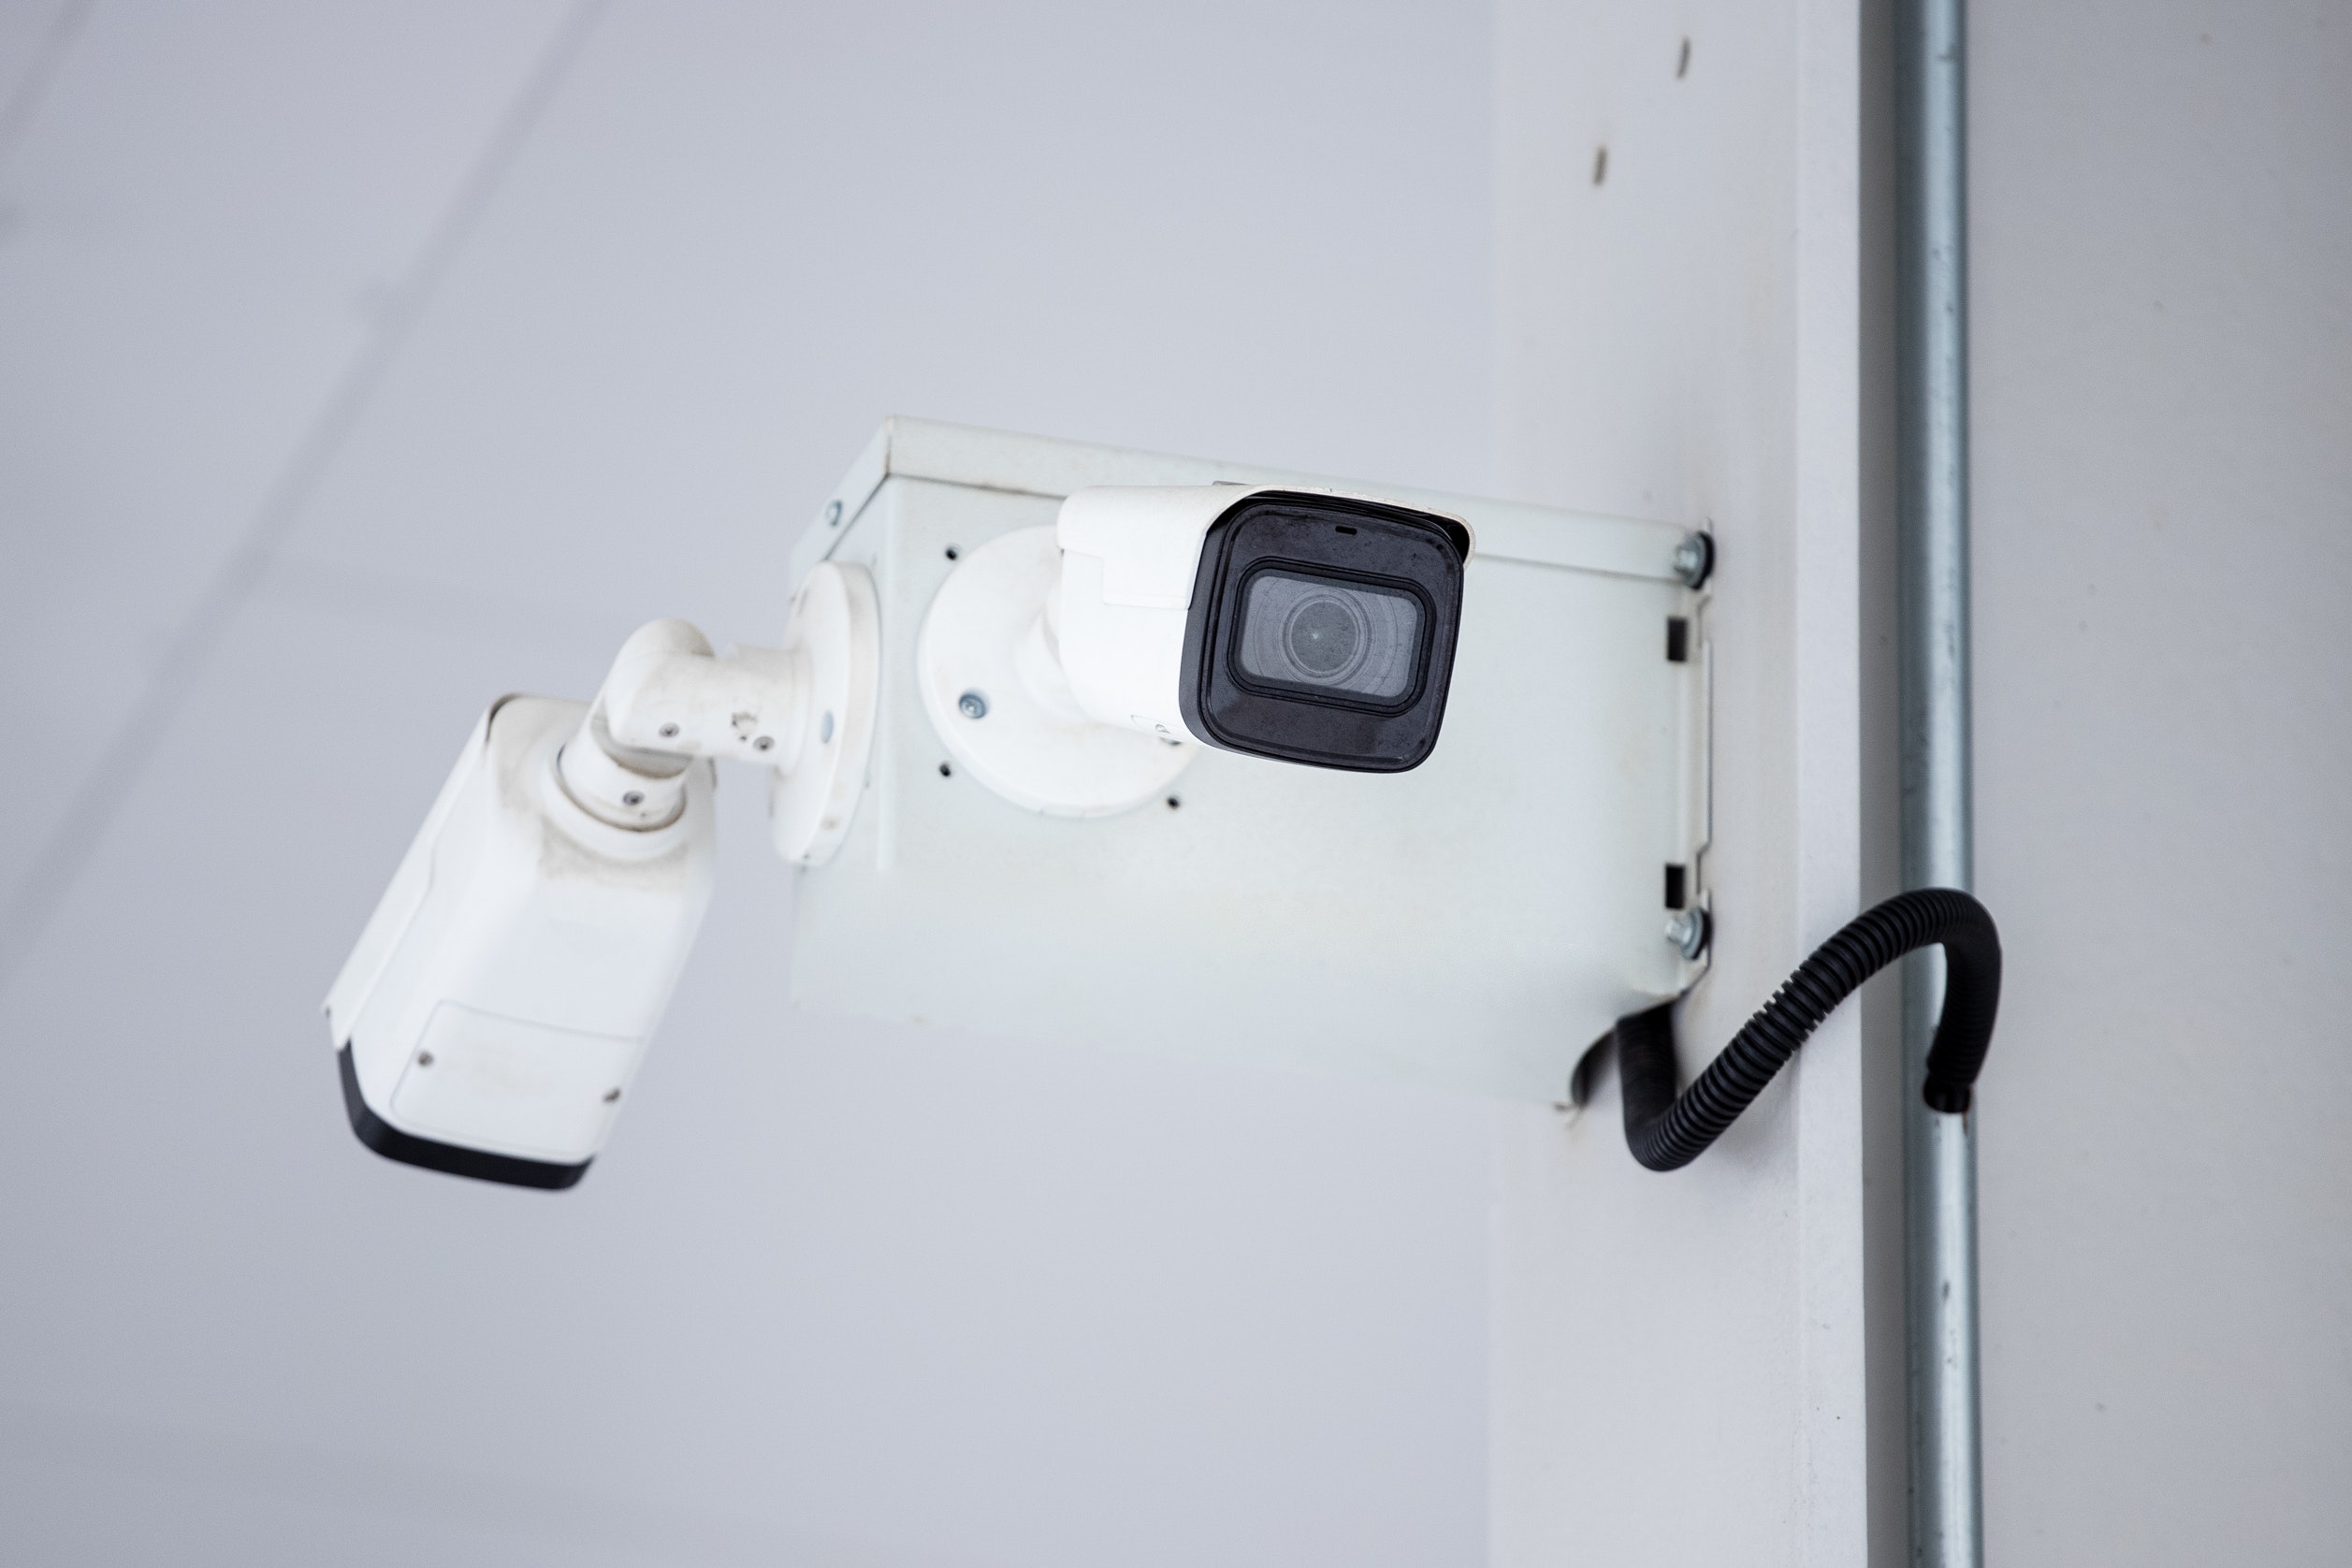 Advantages of CCTV Camera Systems